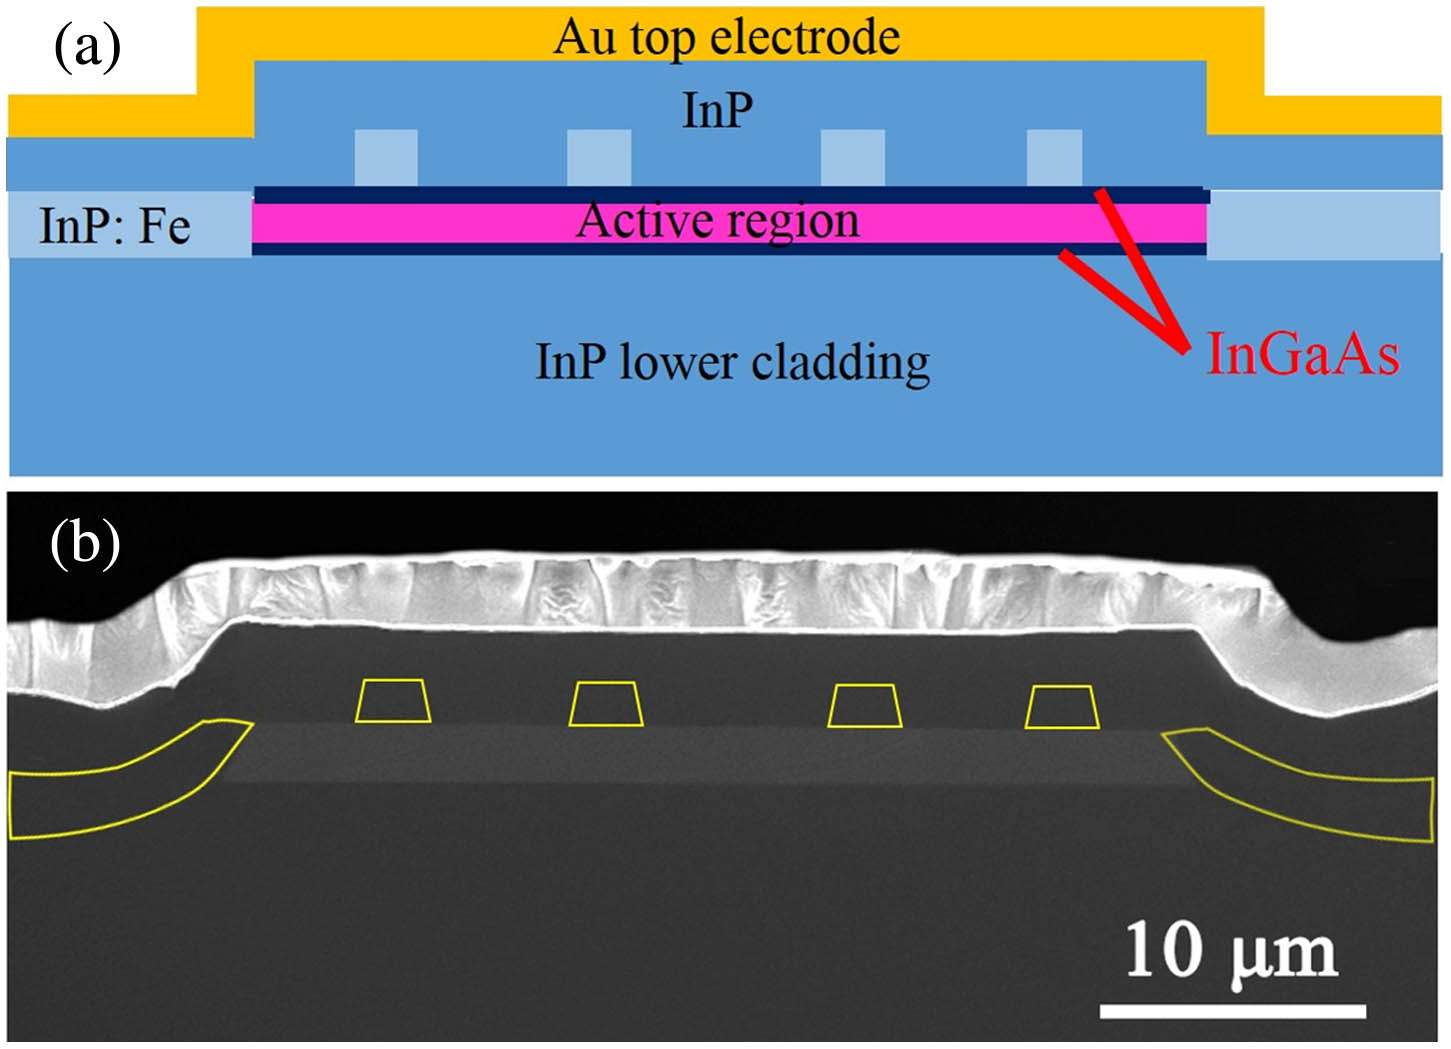 (a) Schematic of device cross section from the facet direction. (b) SEM image of the device facet; region enclosed by the yellow line denotes the regrown InP:Fe.